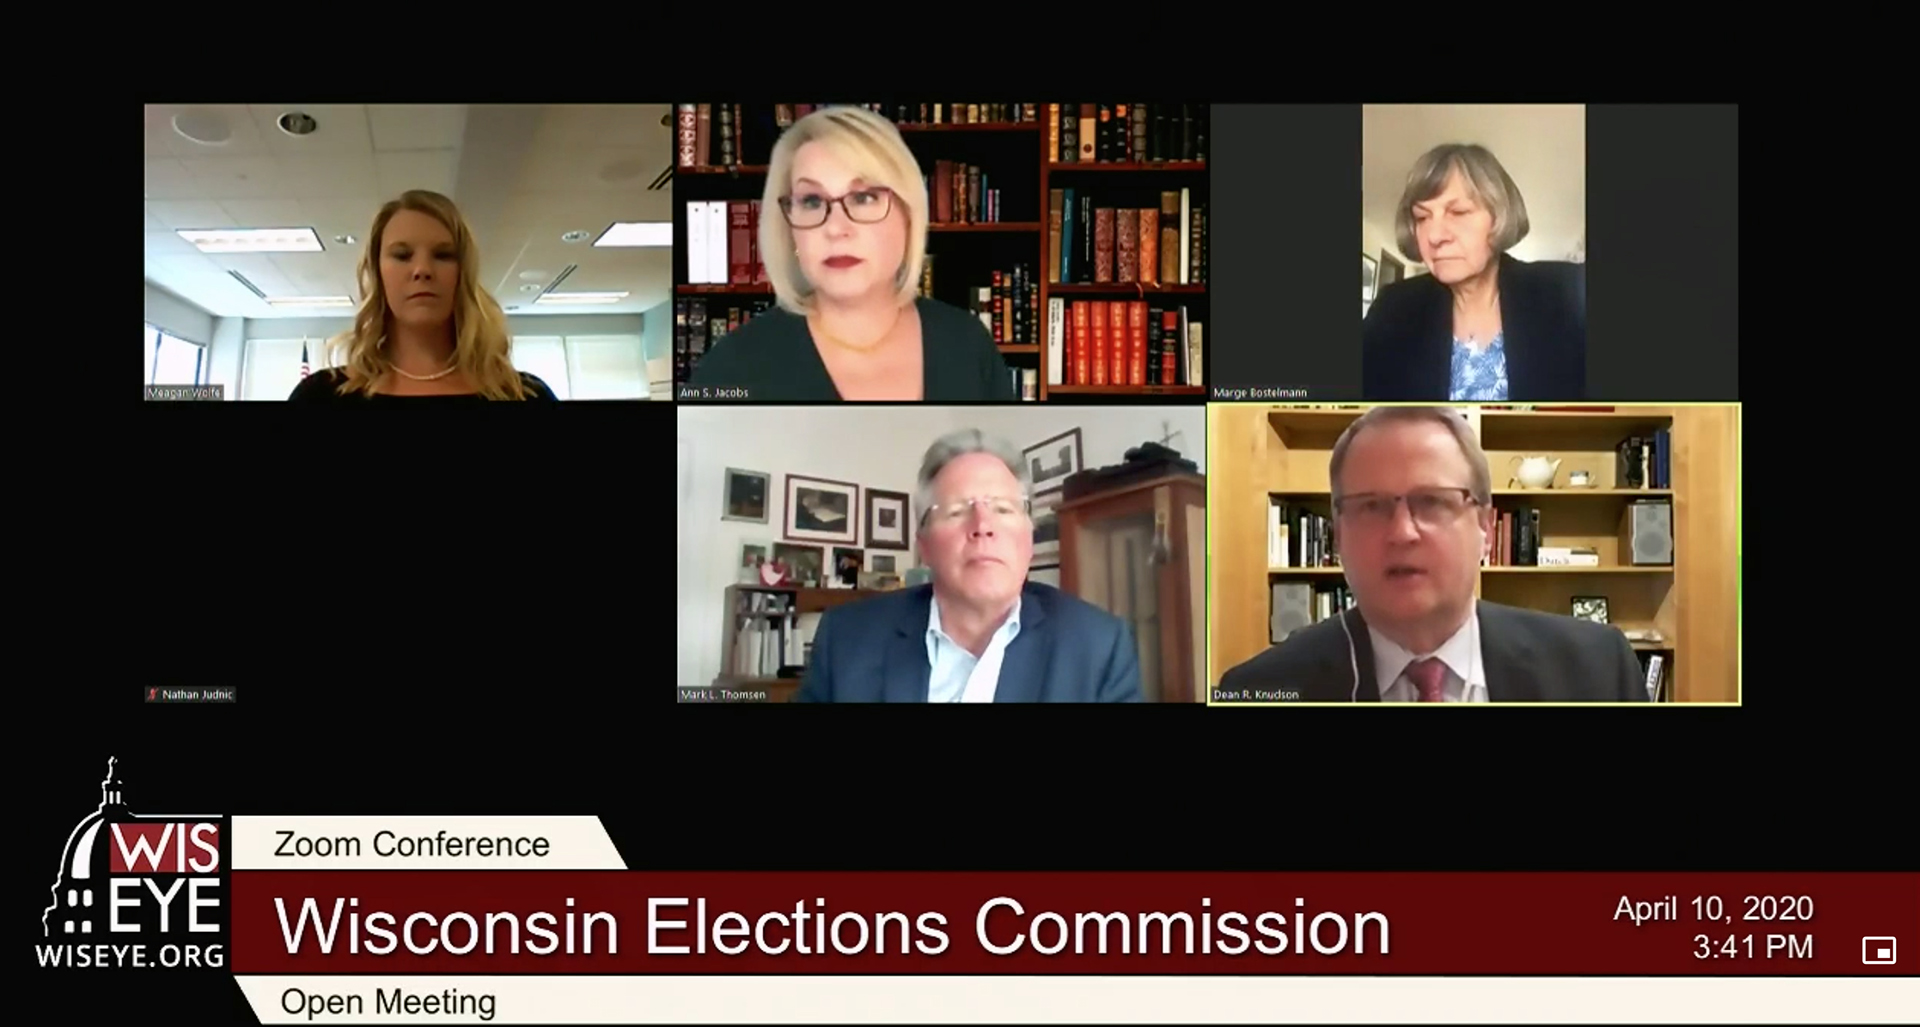 A screenshot shows a video conference with six different participants in different locations, with one having their camera turned off, with a video graphic at bottom reading "Wisconsin Elections Commission," "Open Meeting" and "April 10, 2020."